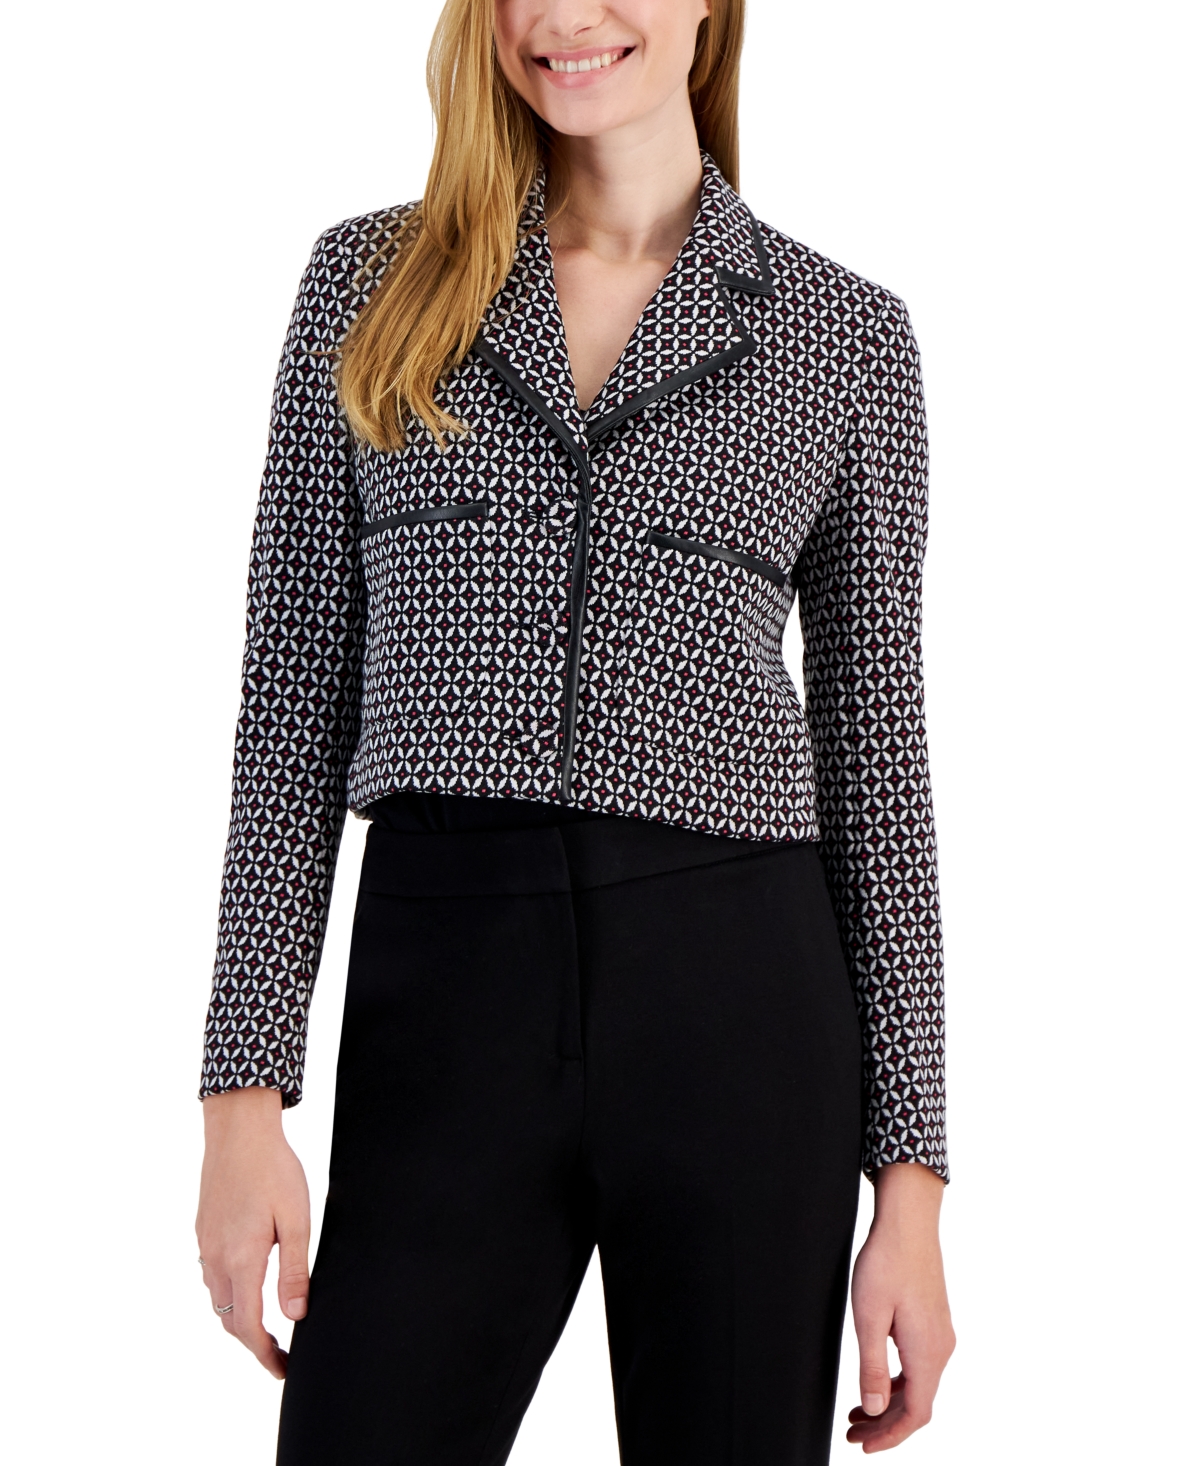 Women's Faux-Leather-Trimmed Cropped Jacket, Created for Macy's - Black Multi